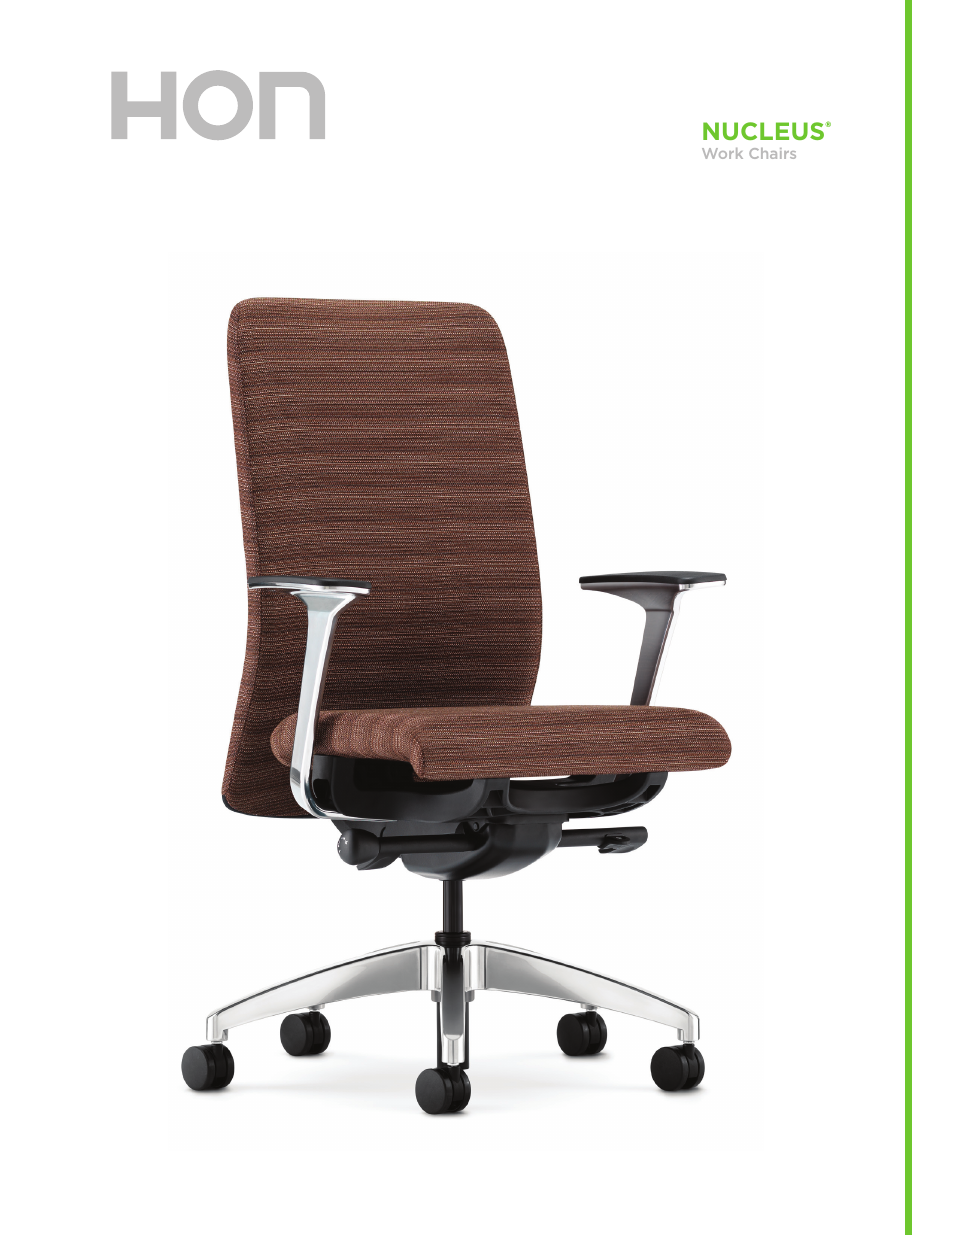 Nucleus Work Chairs